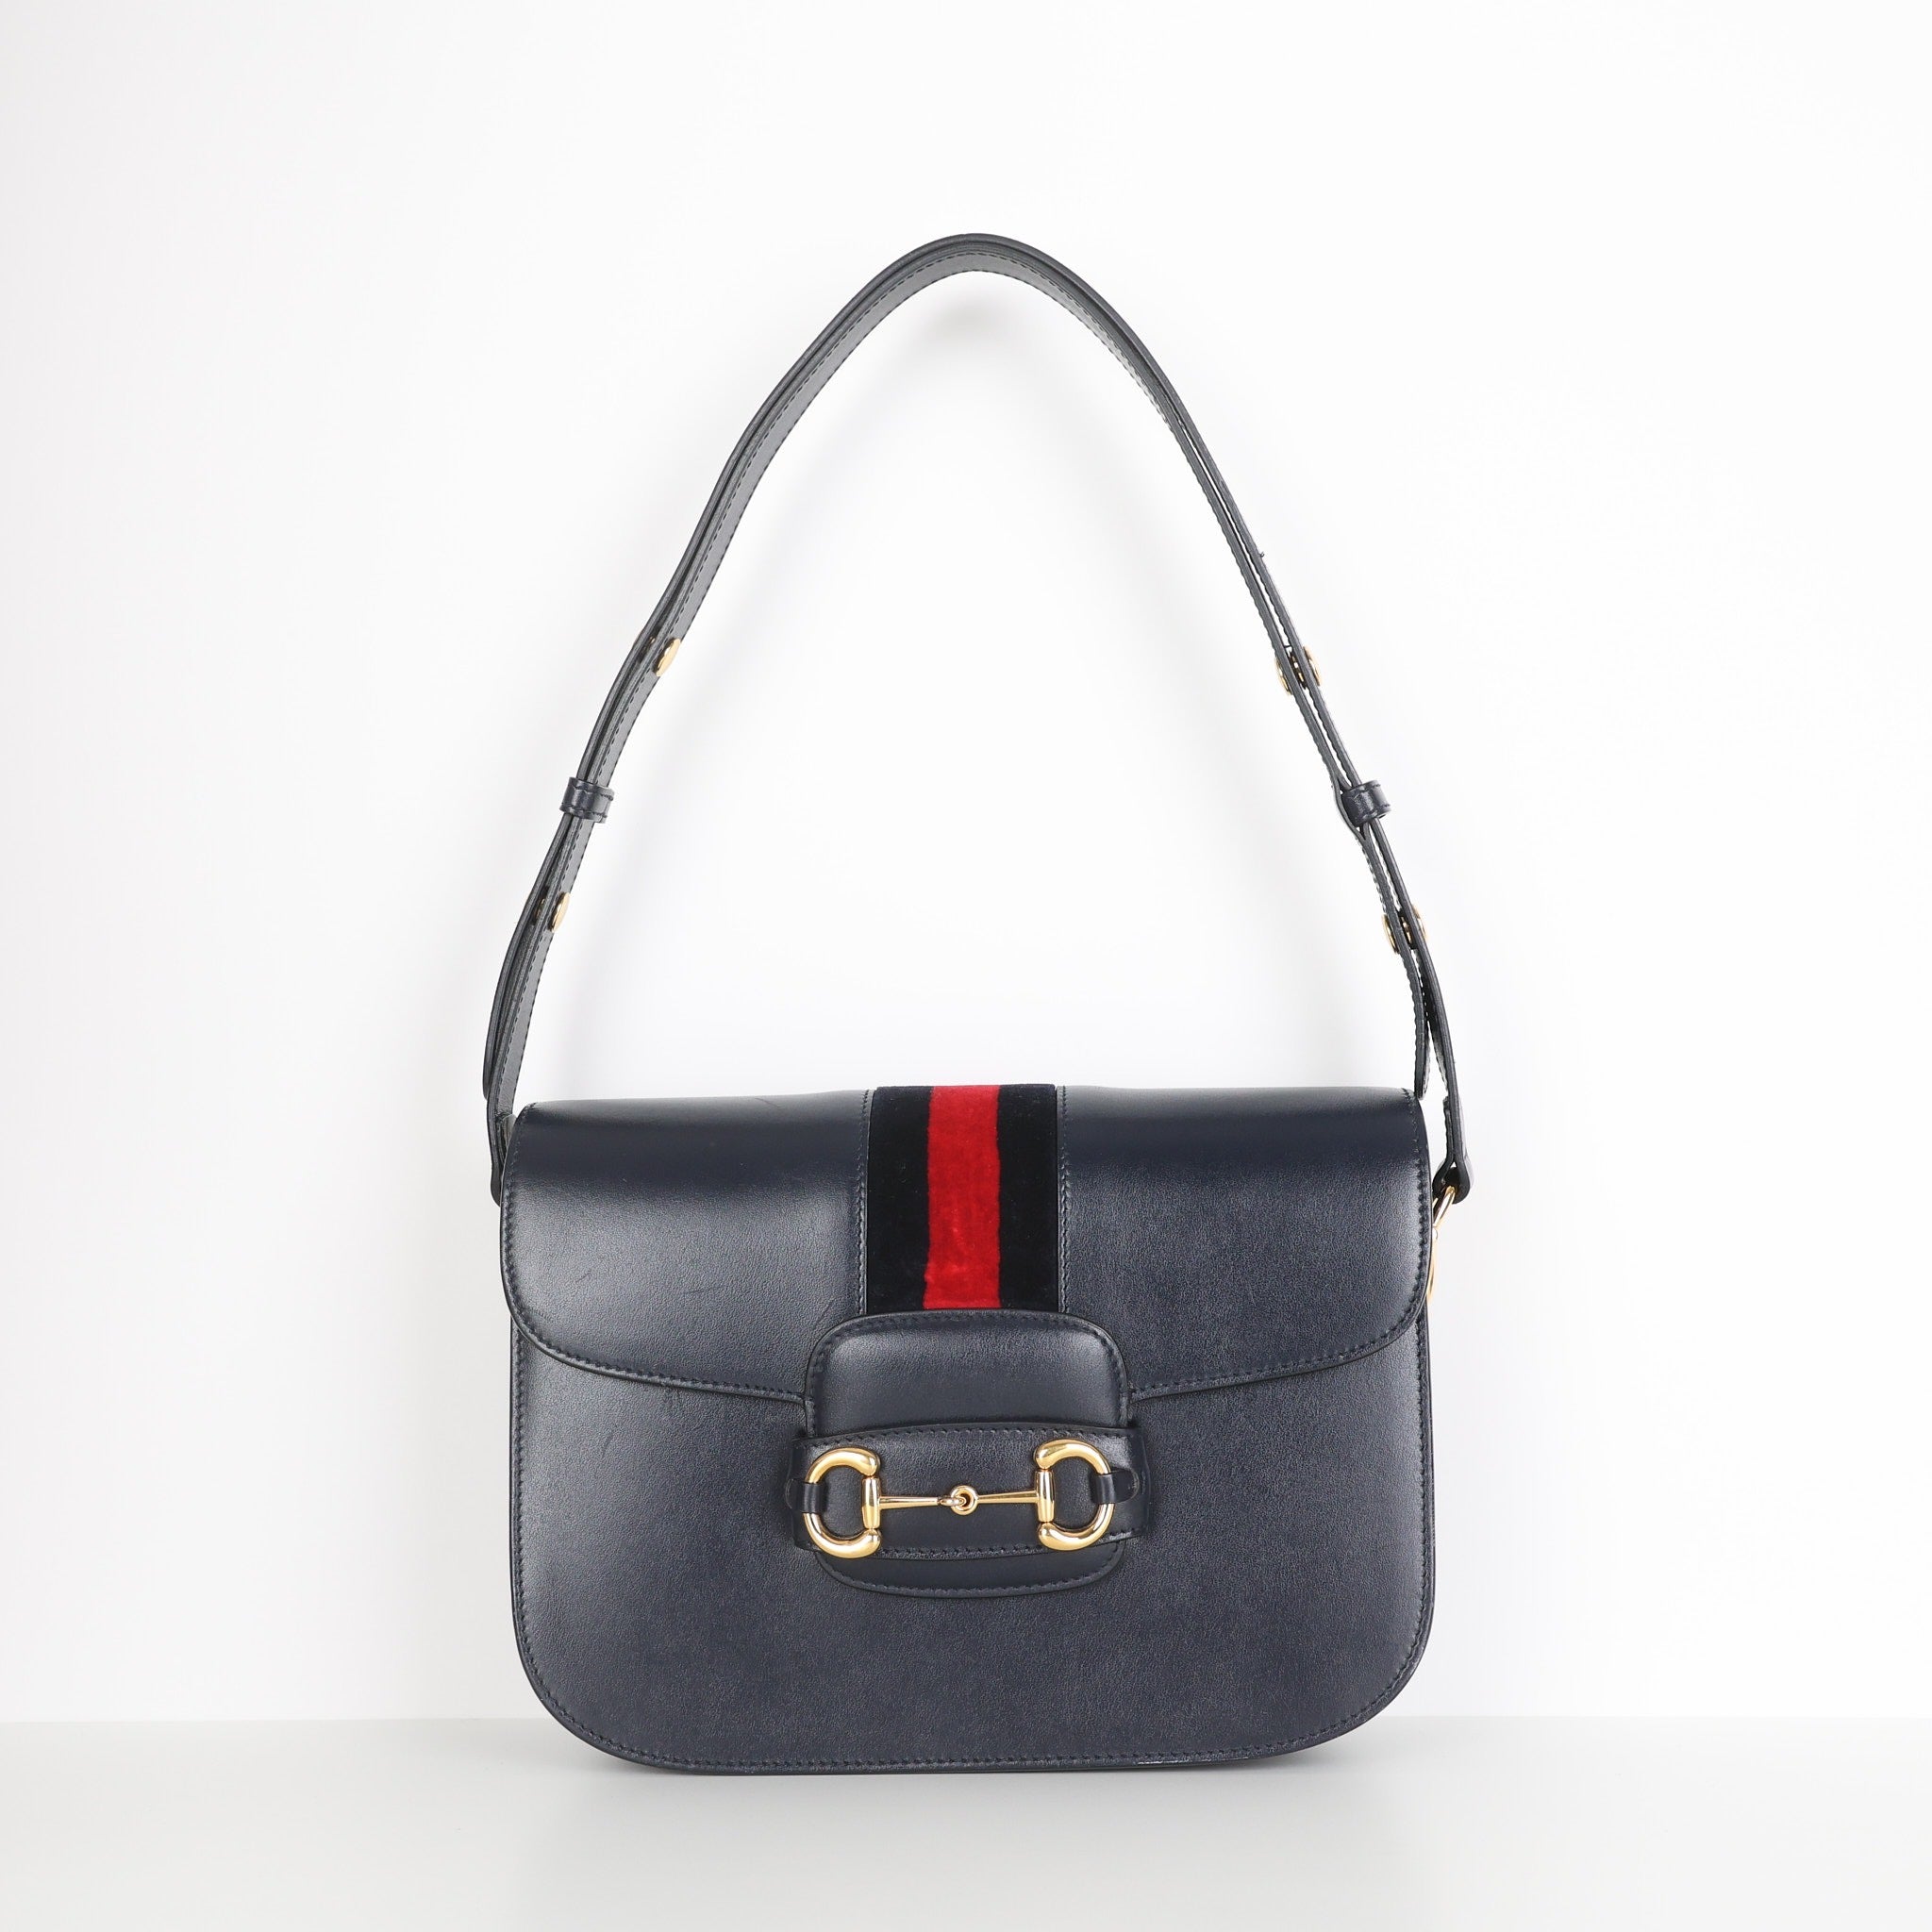 Gucci Blondie Small Shoulder Bag in Multicoloured - Gucci | Mytheresa